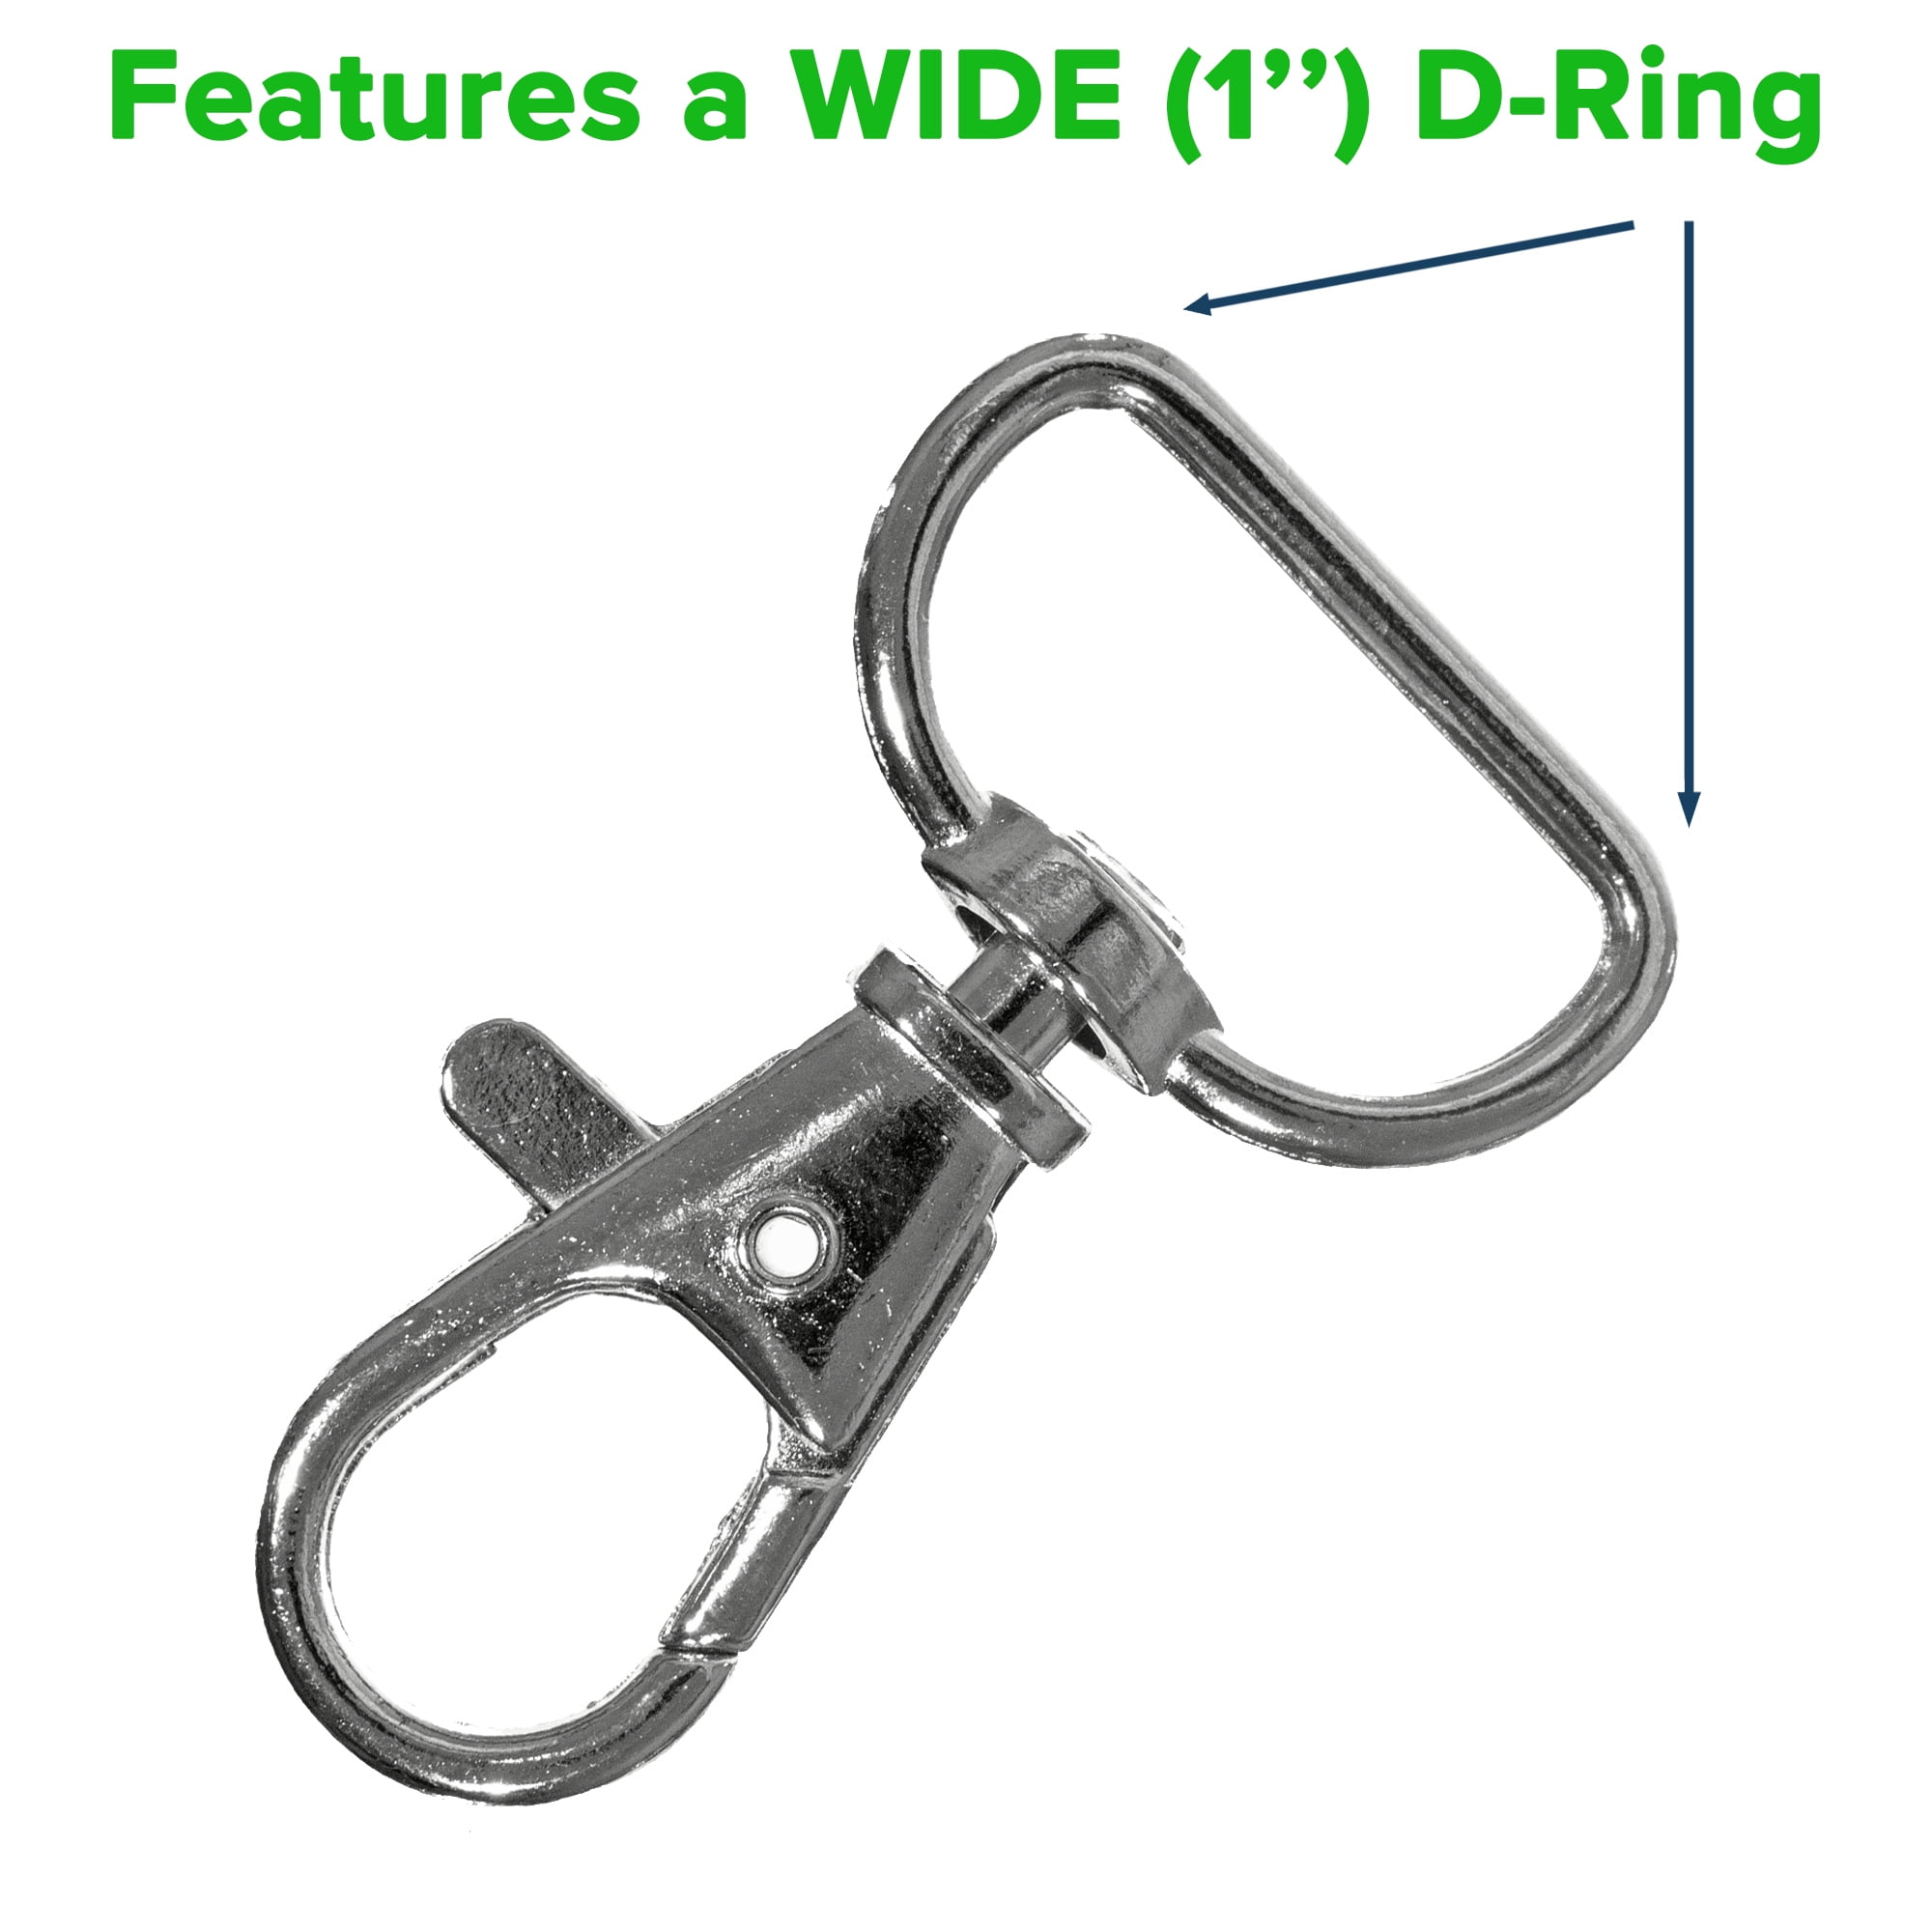 Wuuycoky Silvery 1 Inner Diameter D Ring Big Flat Buckle Lobster Clasps Swivel Snap Hooks Pack of 10 